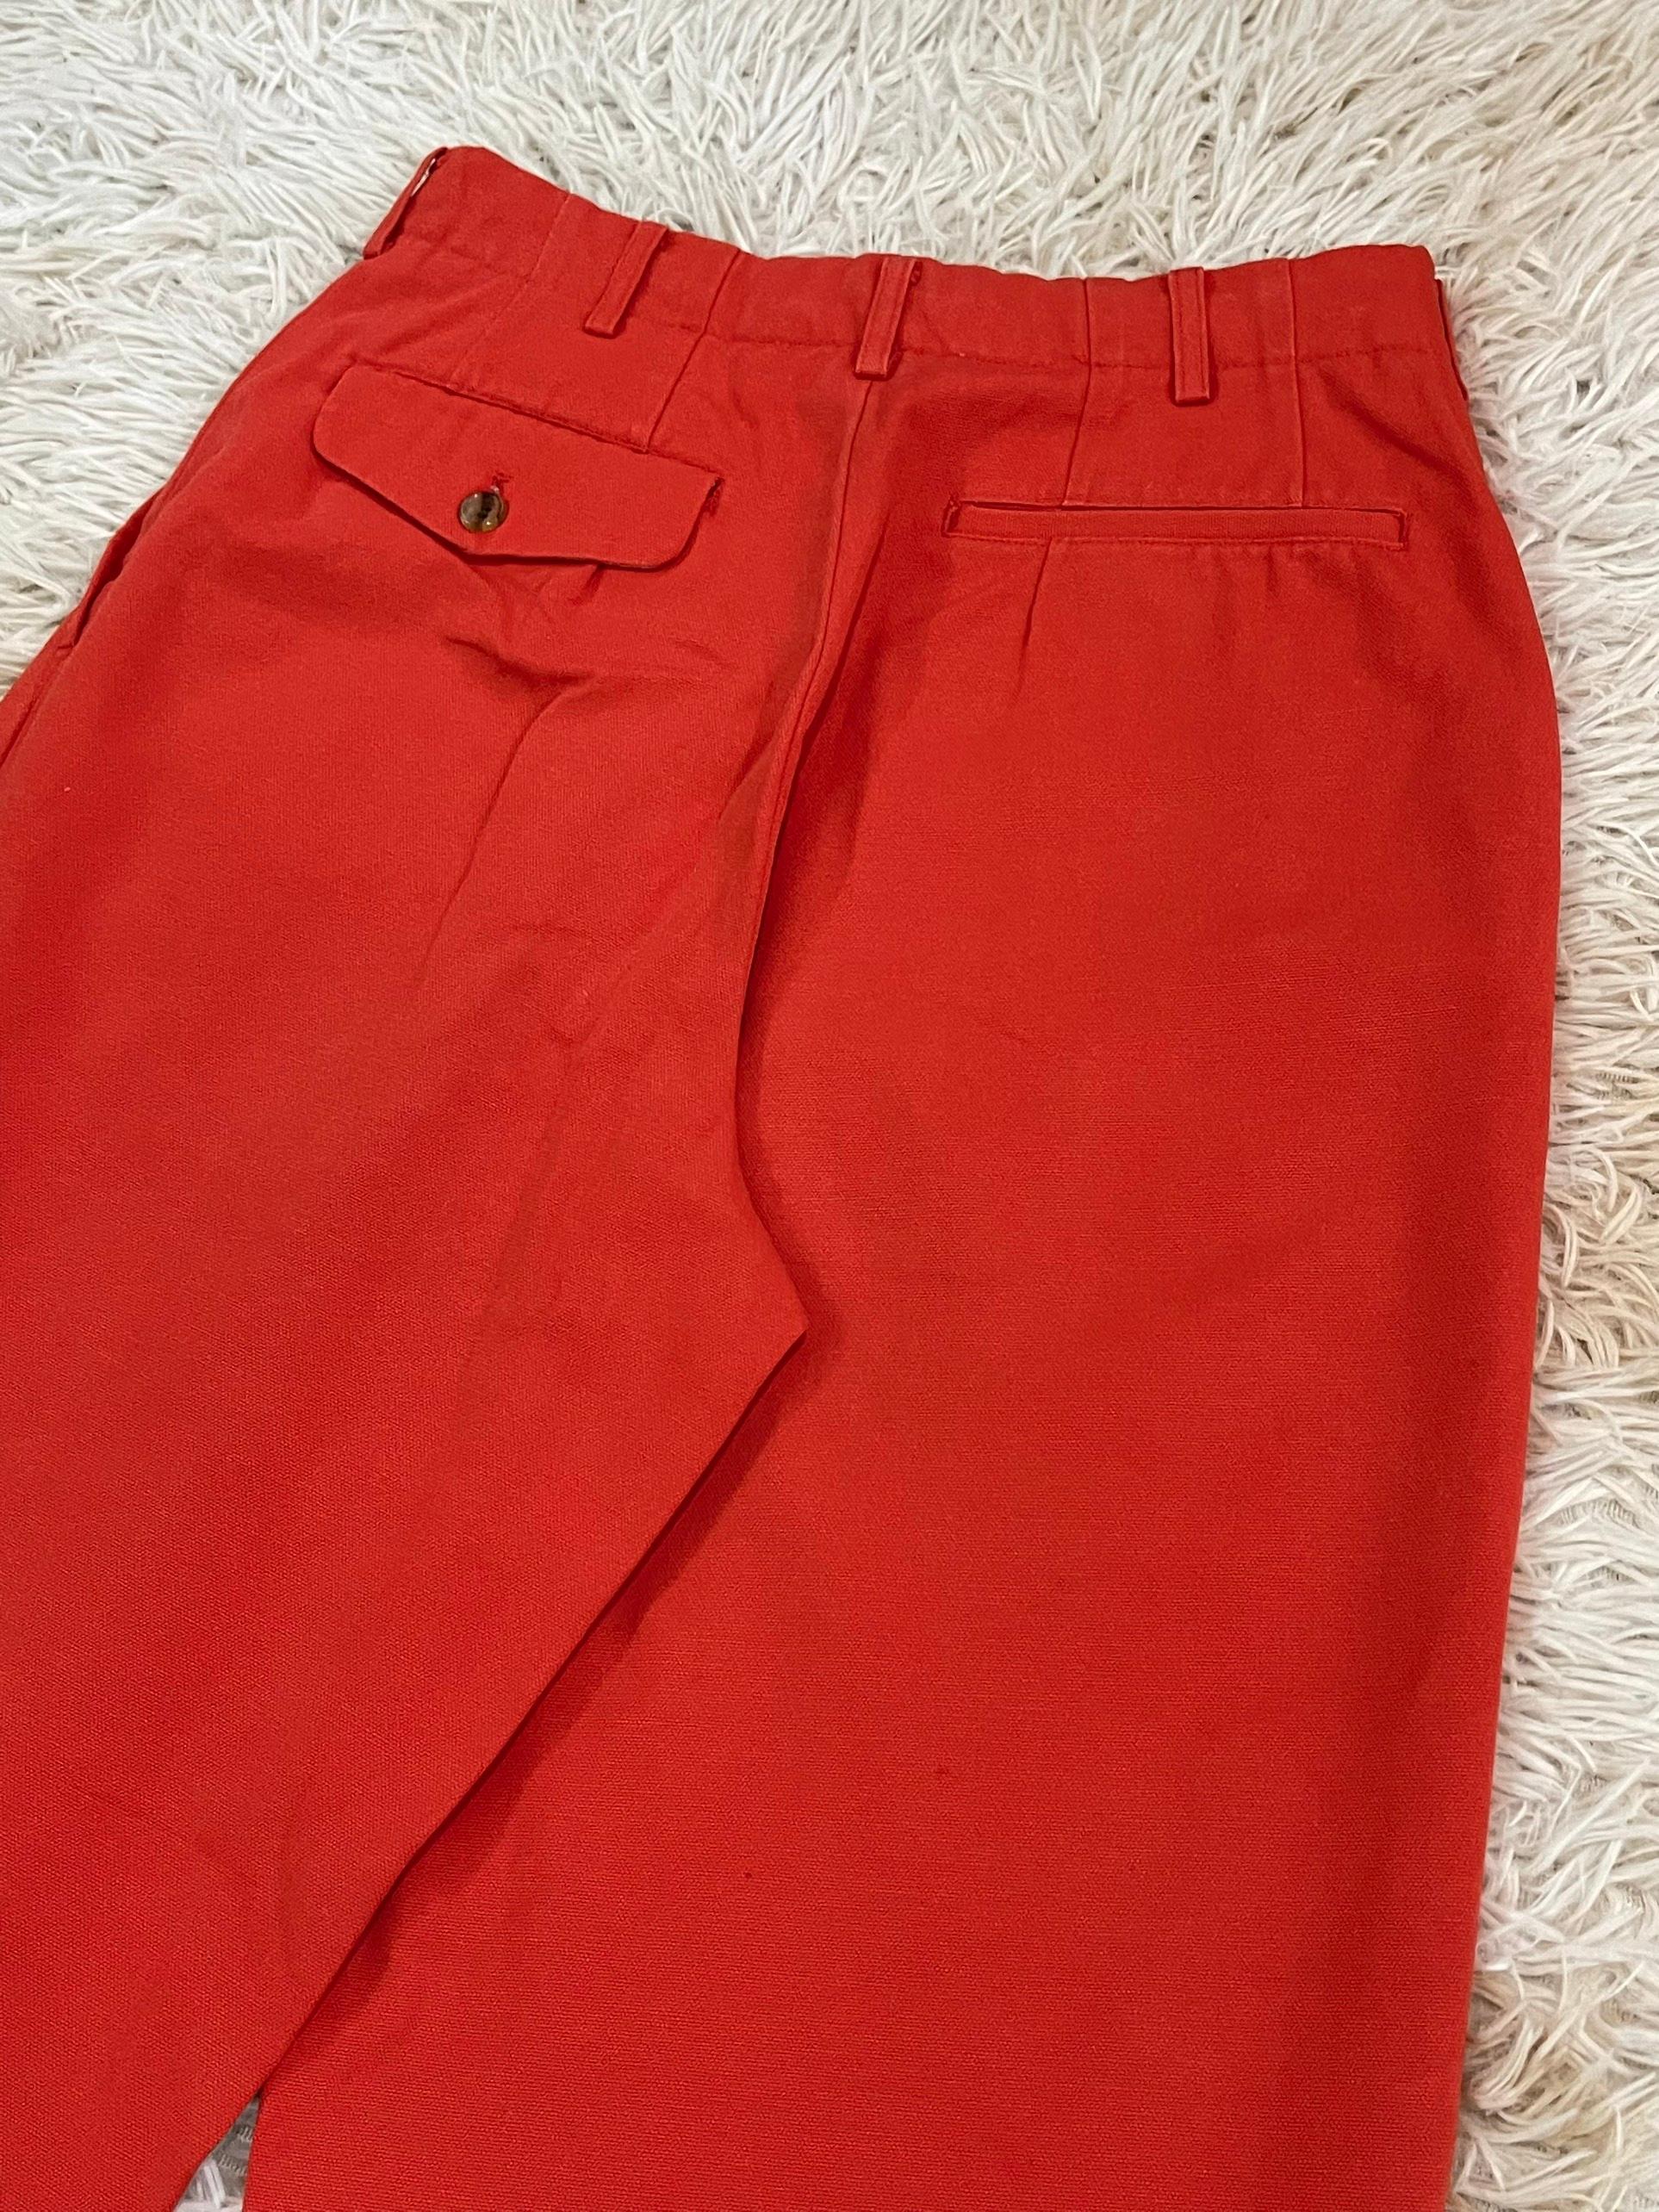 Women's or Men's Comme Des Garcons HOMME A/W1991 Casual Red Pants For Sale